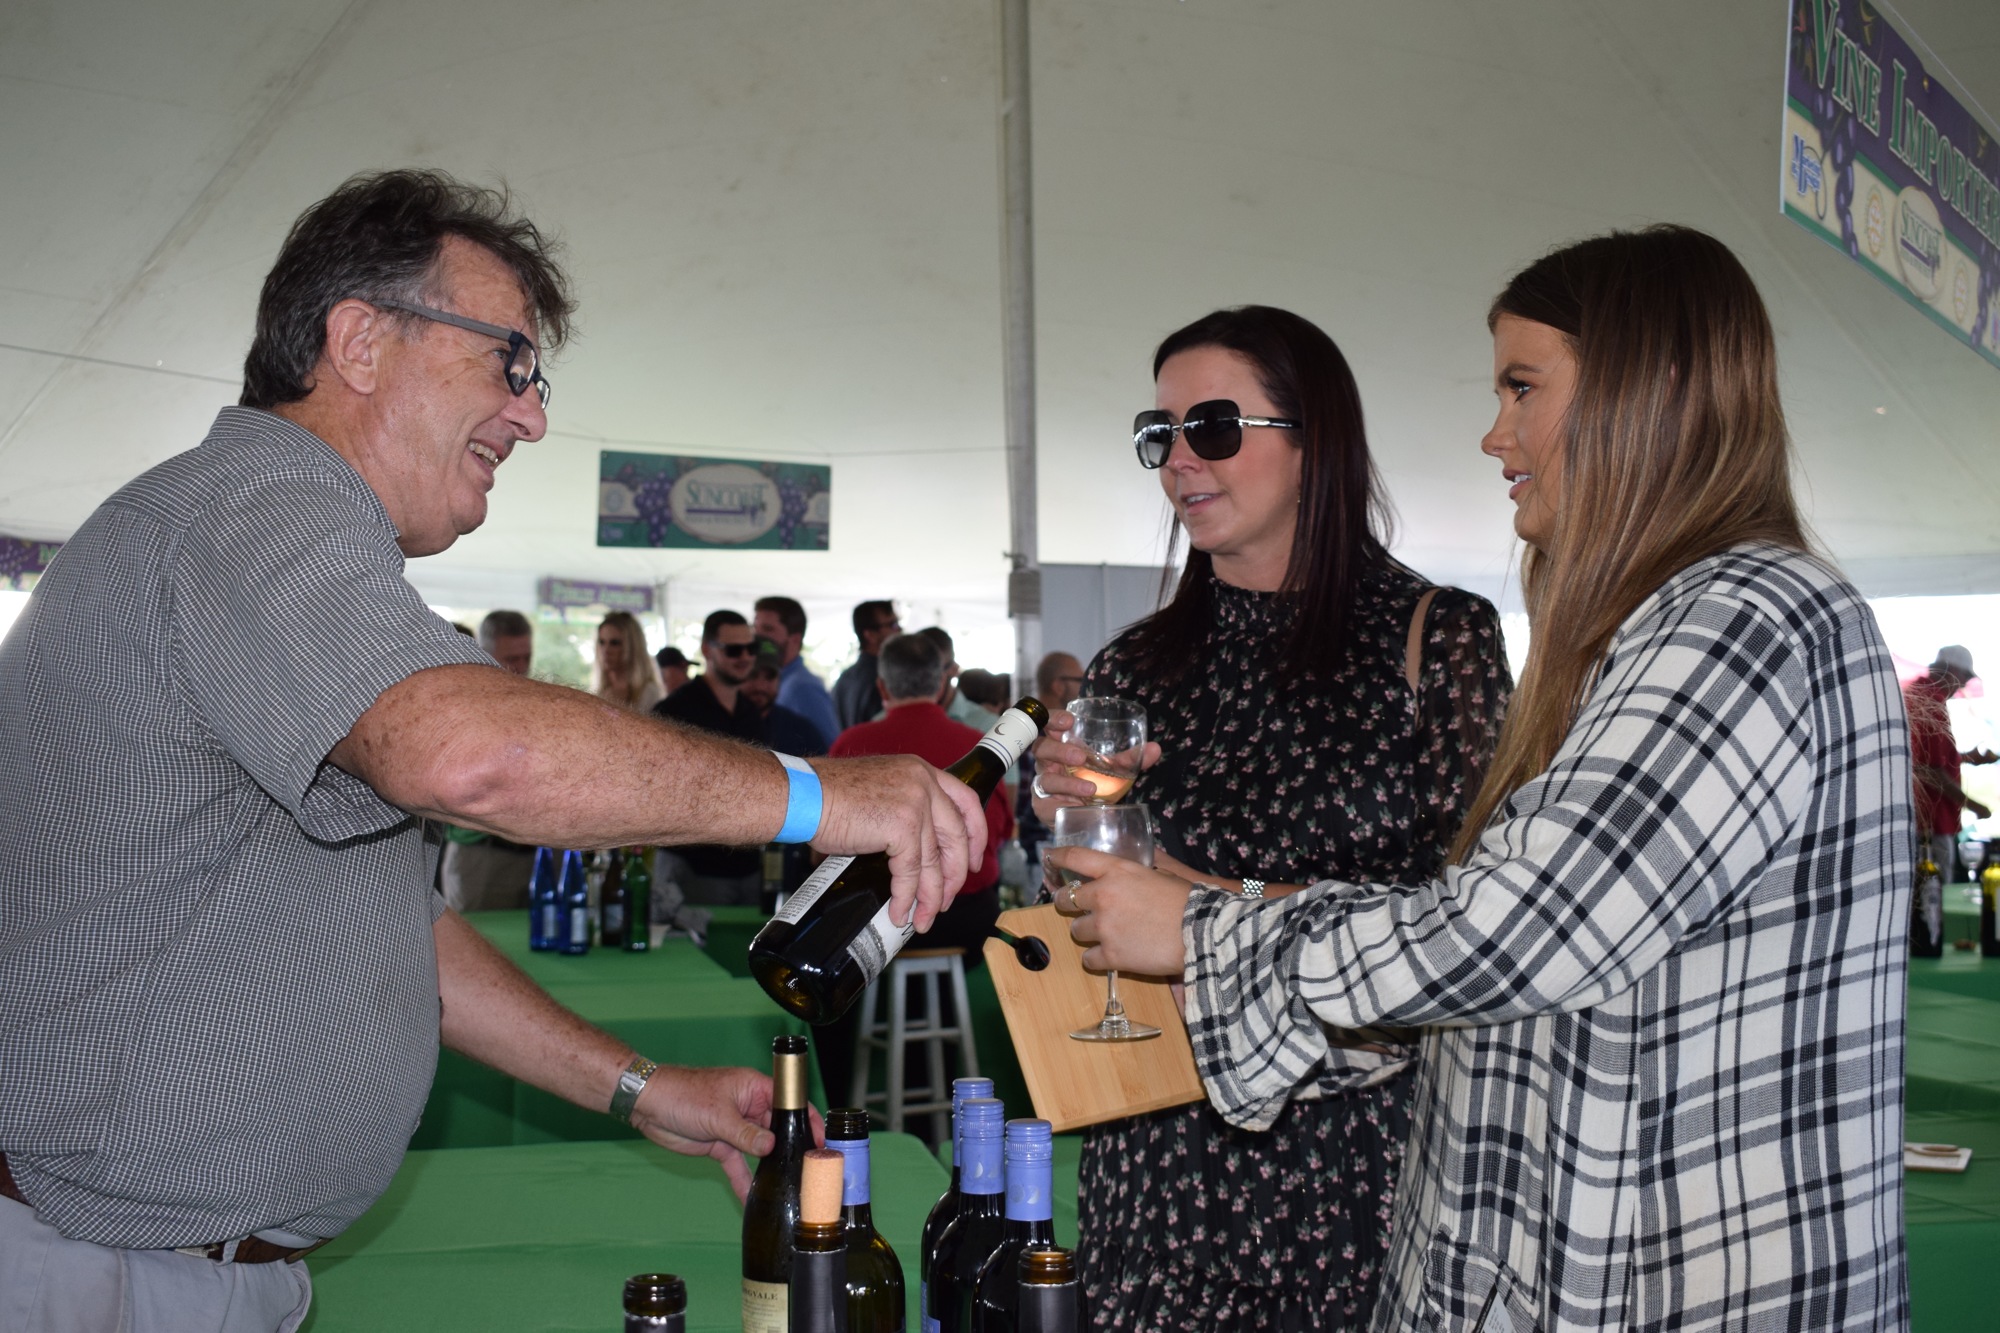 Suncoast Food and Wine Festival offers a variety of samples at its annual event. (File photo)